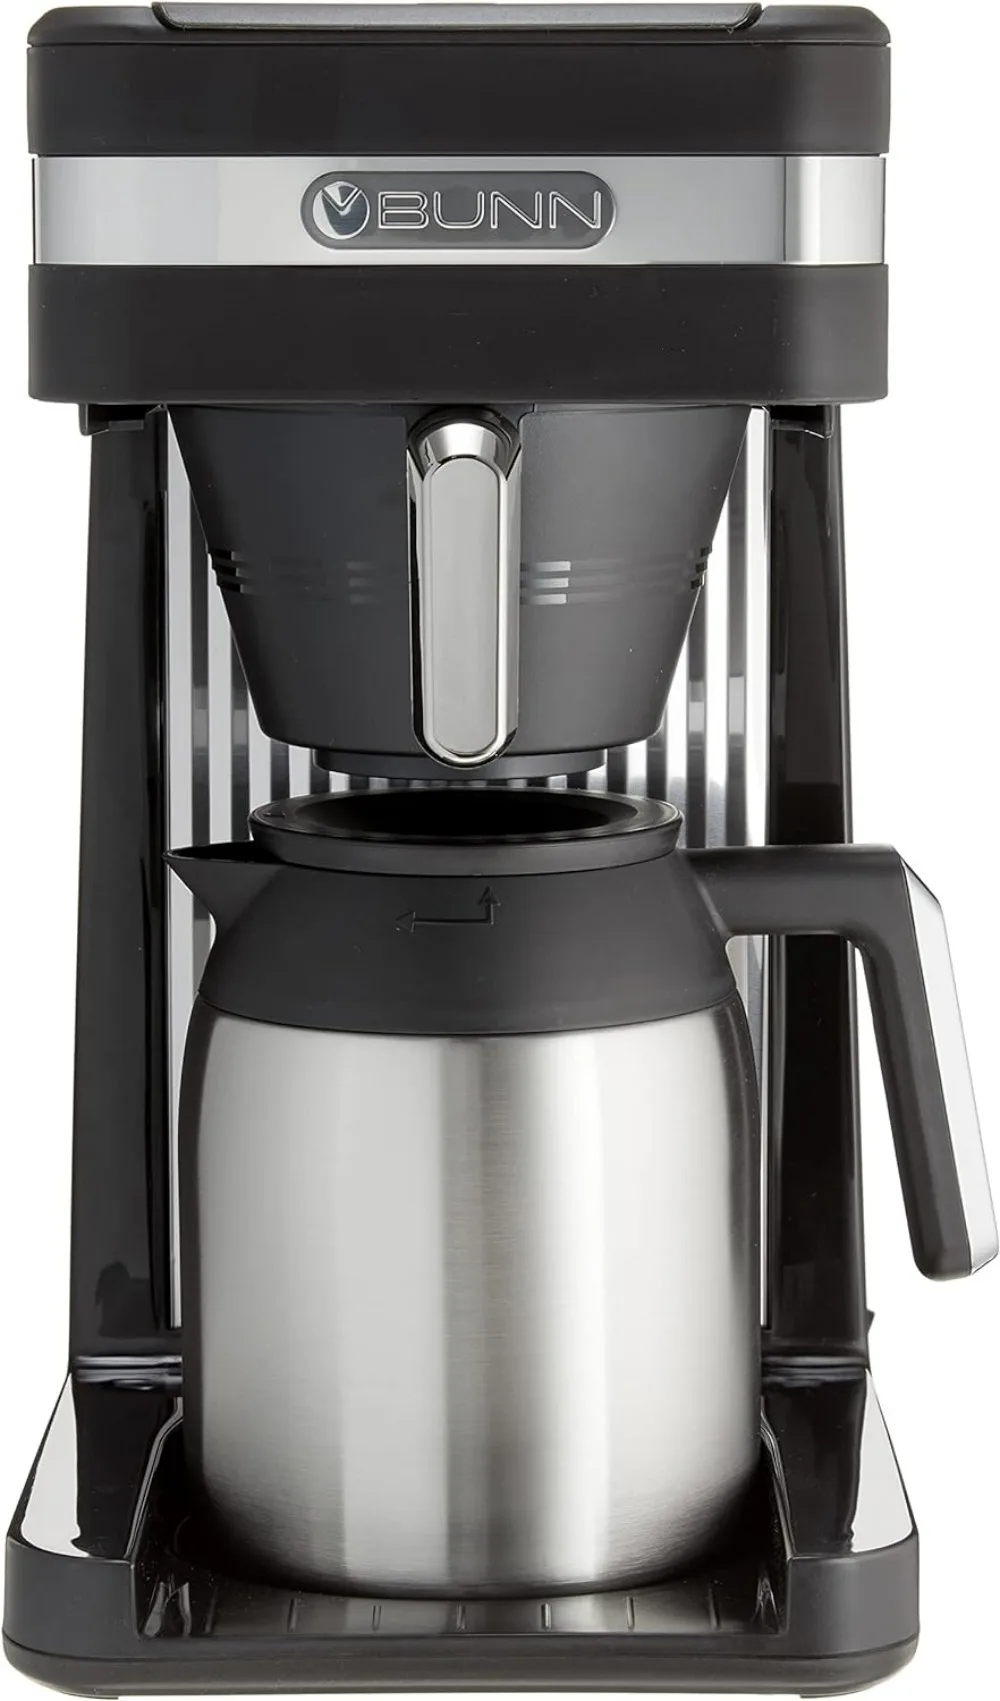 

55200 CSB3T Speed Brew Platinum Thermal Coffee Maker Stainless Steel, 10-Cup, Black